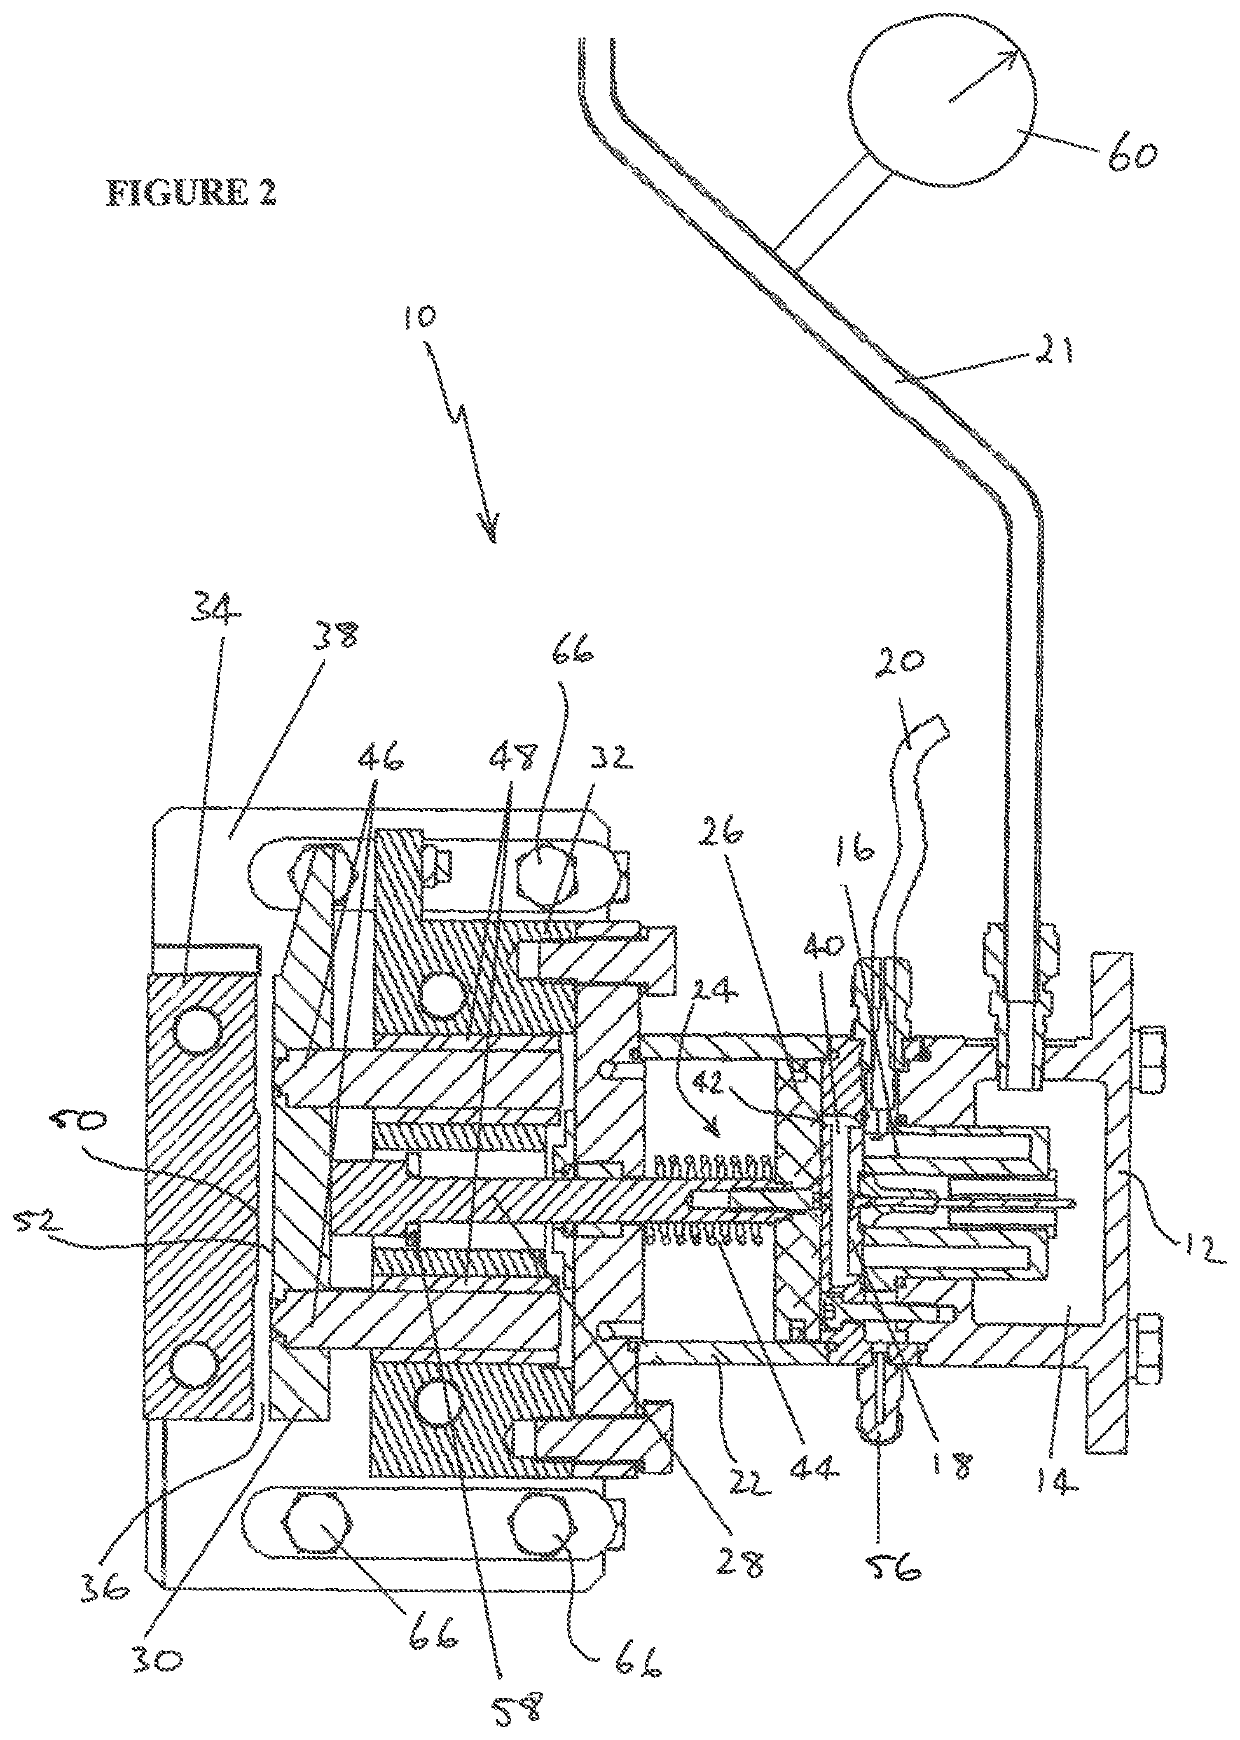 Safety apparatus for protecting an operator of an electrically powered saw